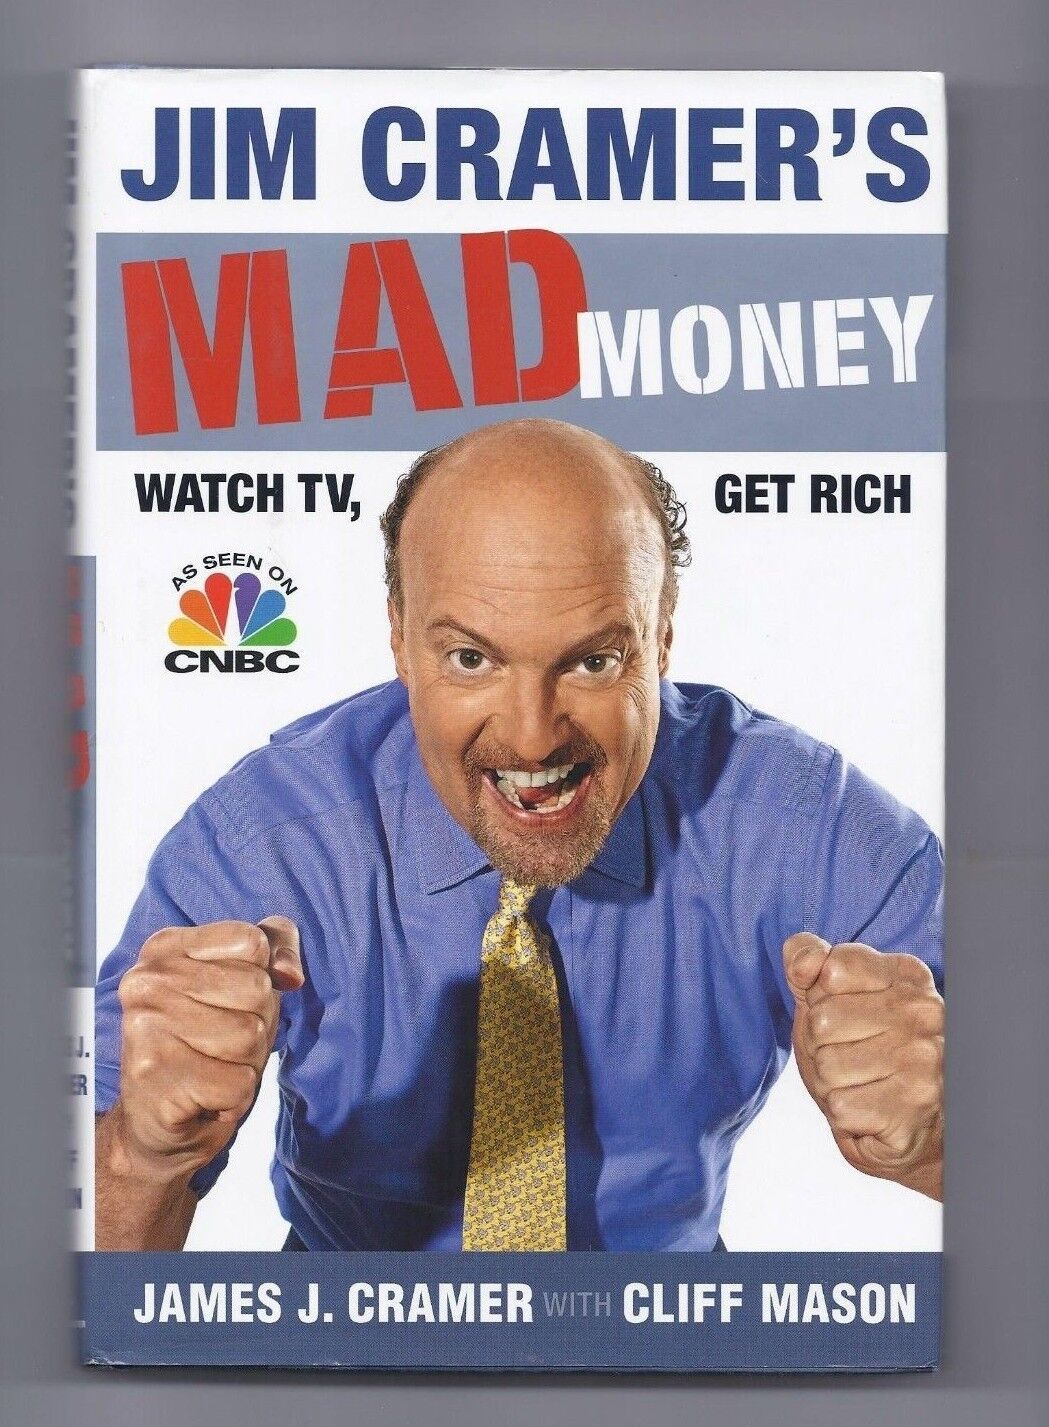 Primary image for Jim Cramer's Mad Money : Watch TV, Get Rich by James J. Cramer book